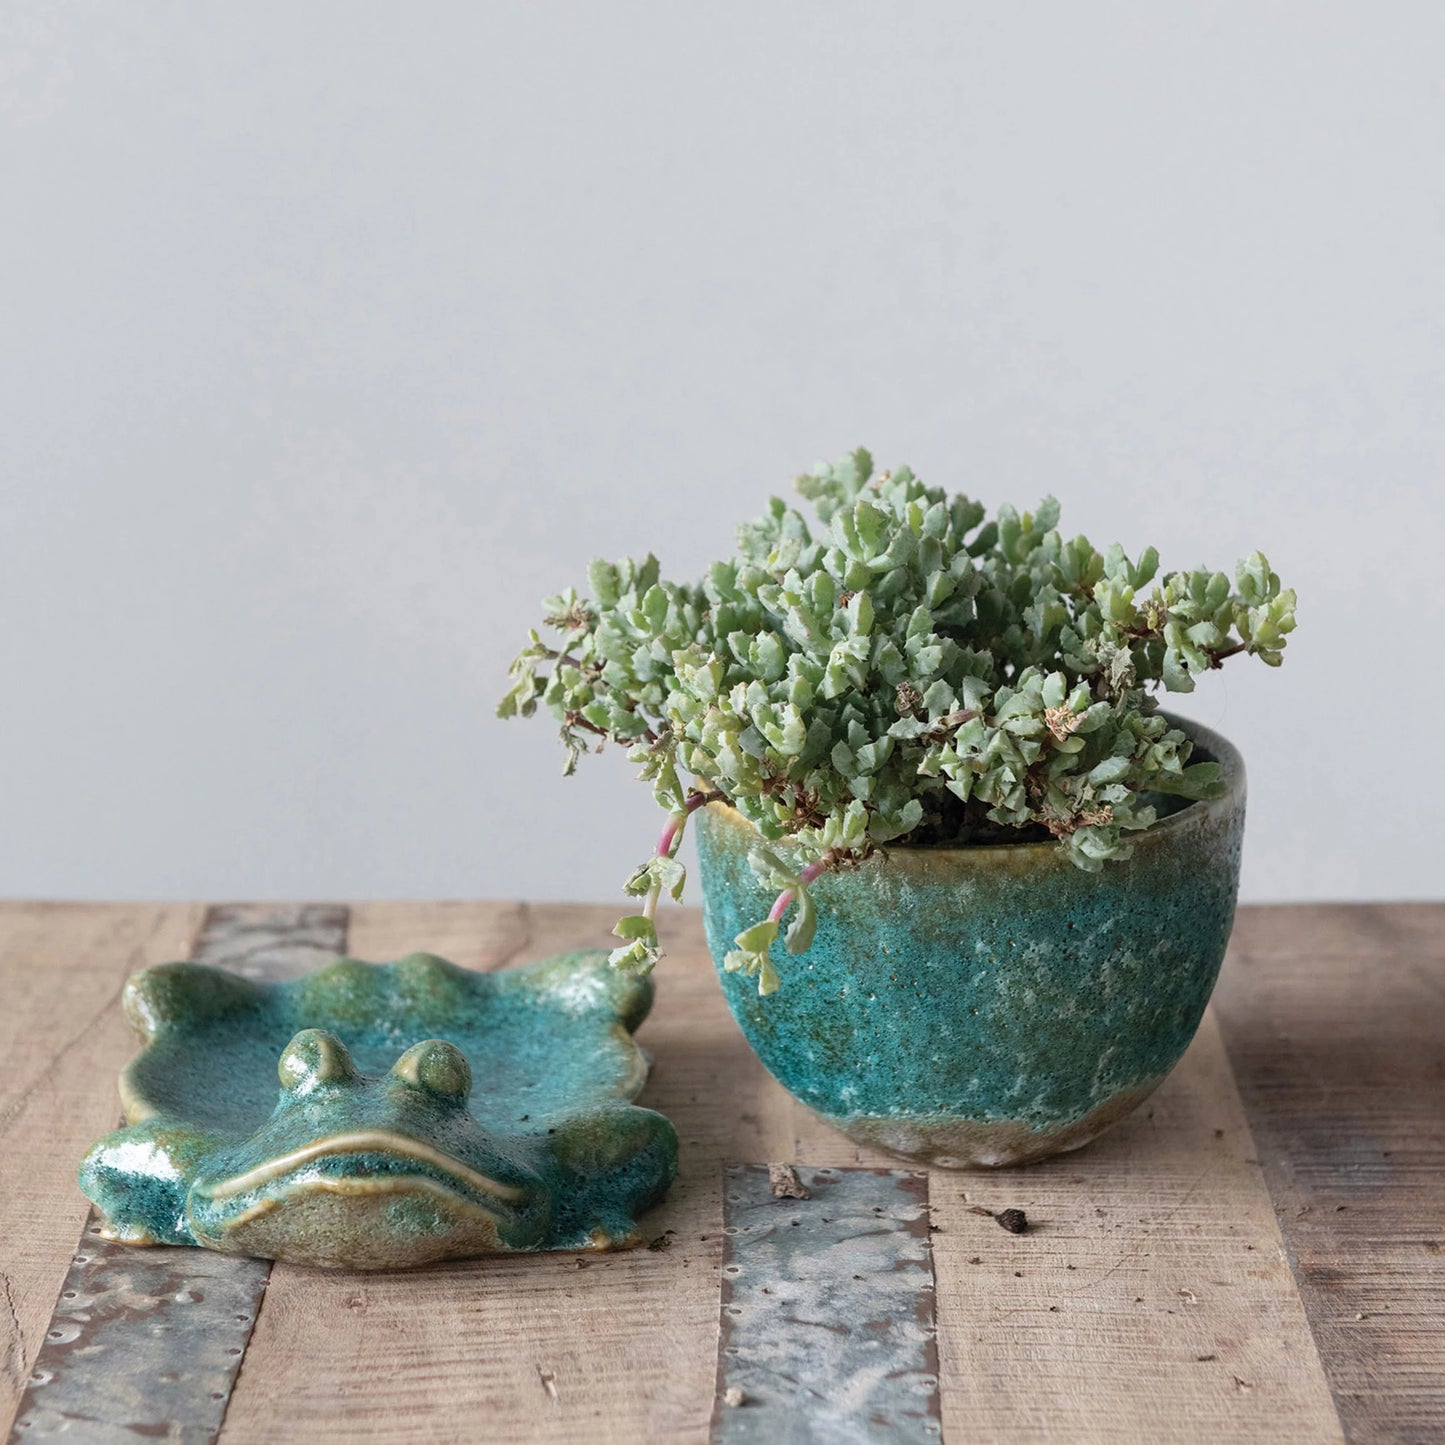 stoneware planter sitting next to the frog base on a rustic wooden surface